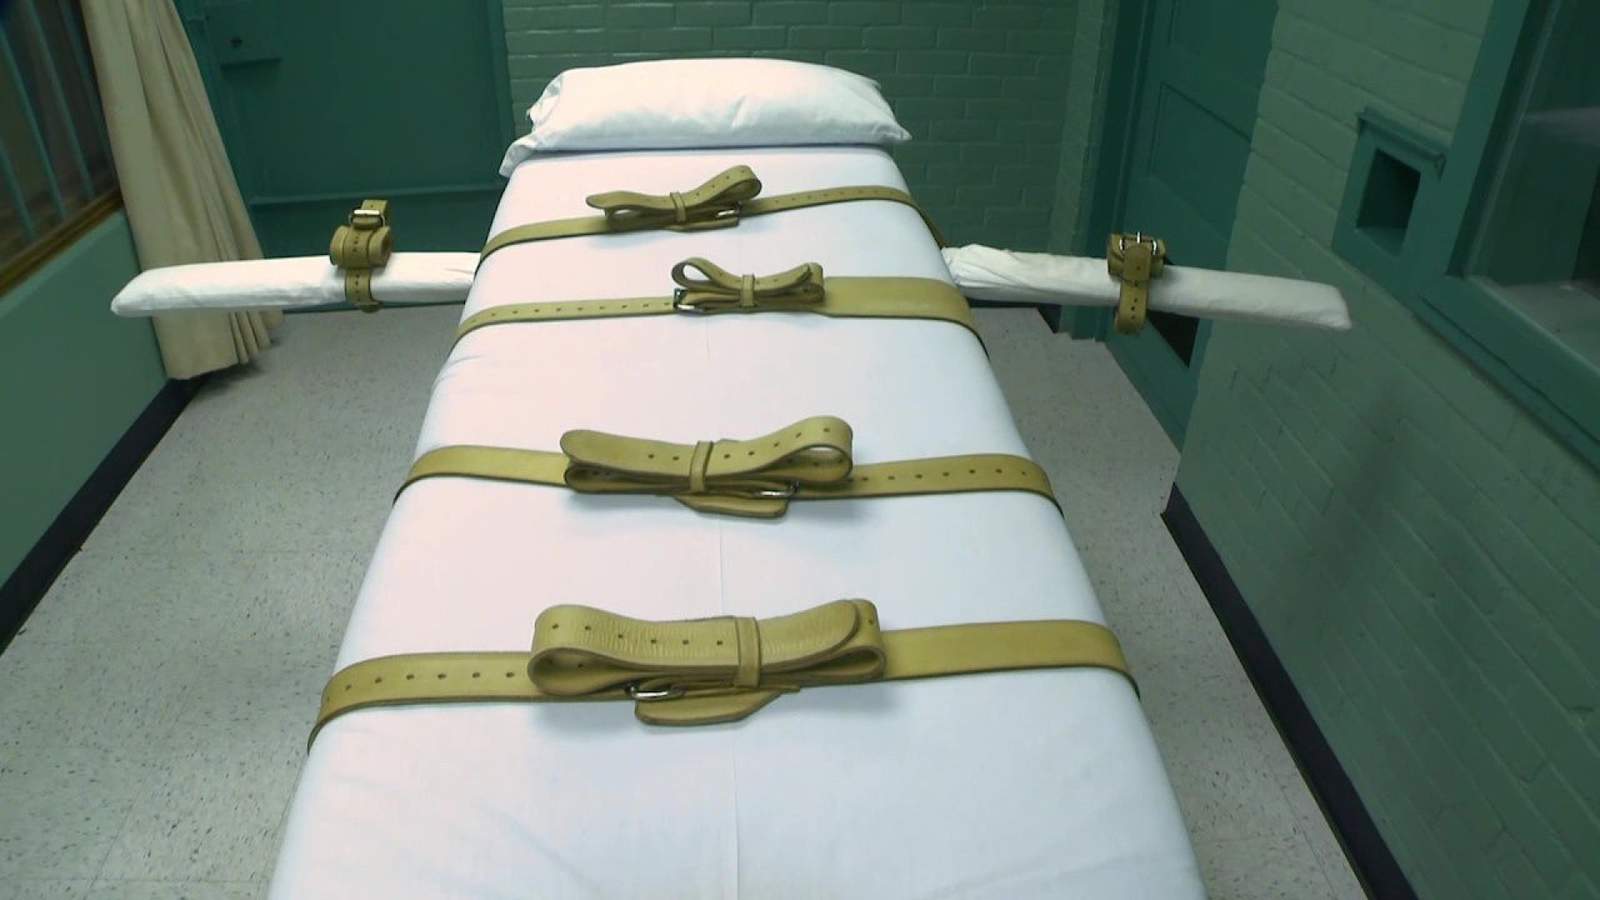 Texas set to resume executions after delay during pandemic